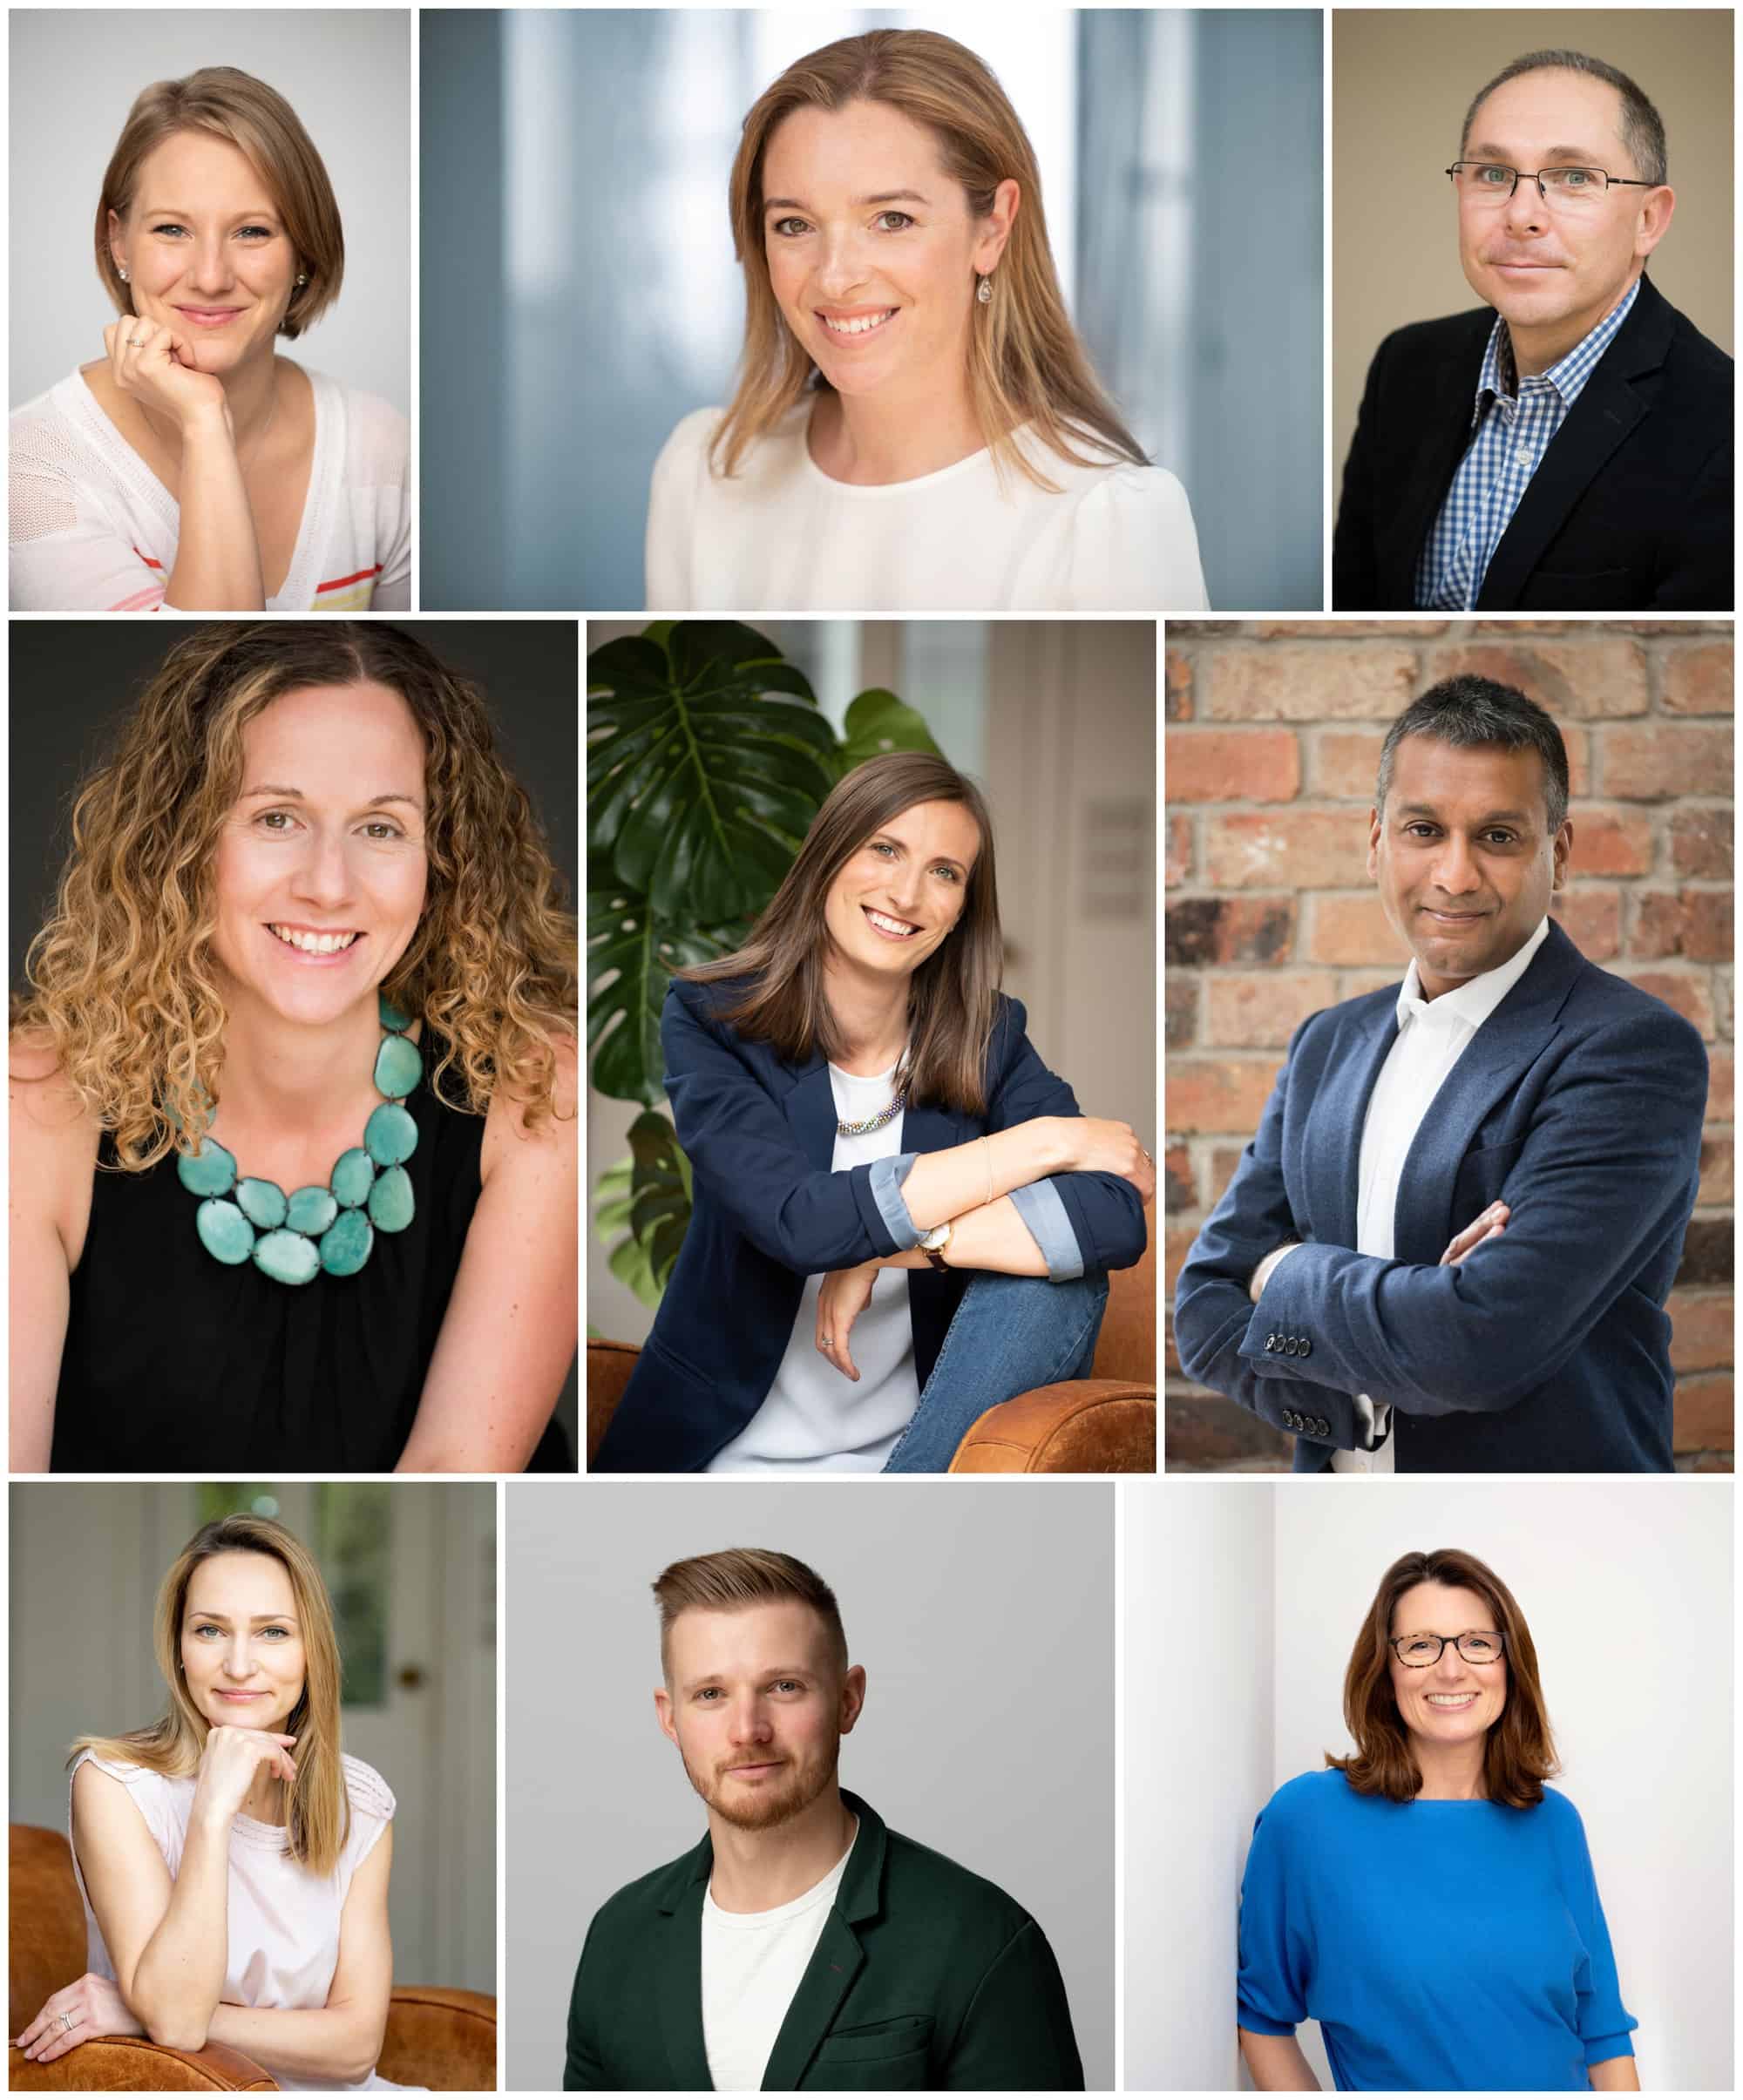 Examples of professional headshots for LinkedIn